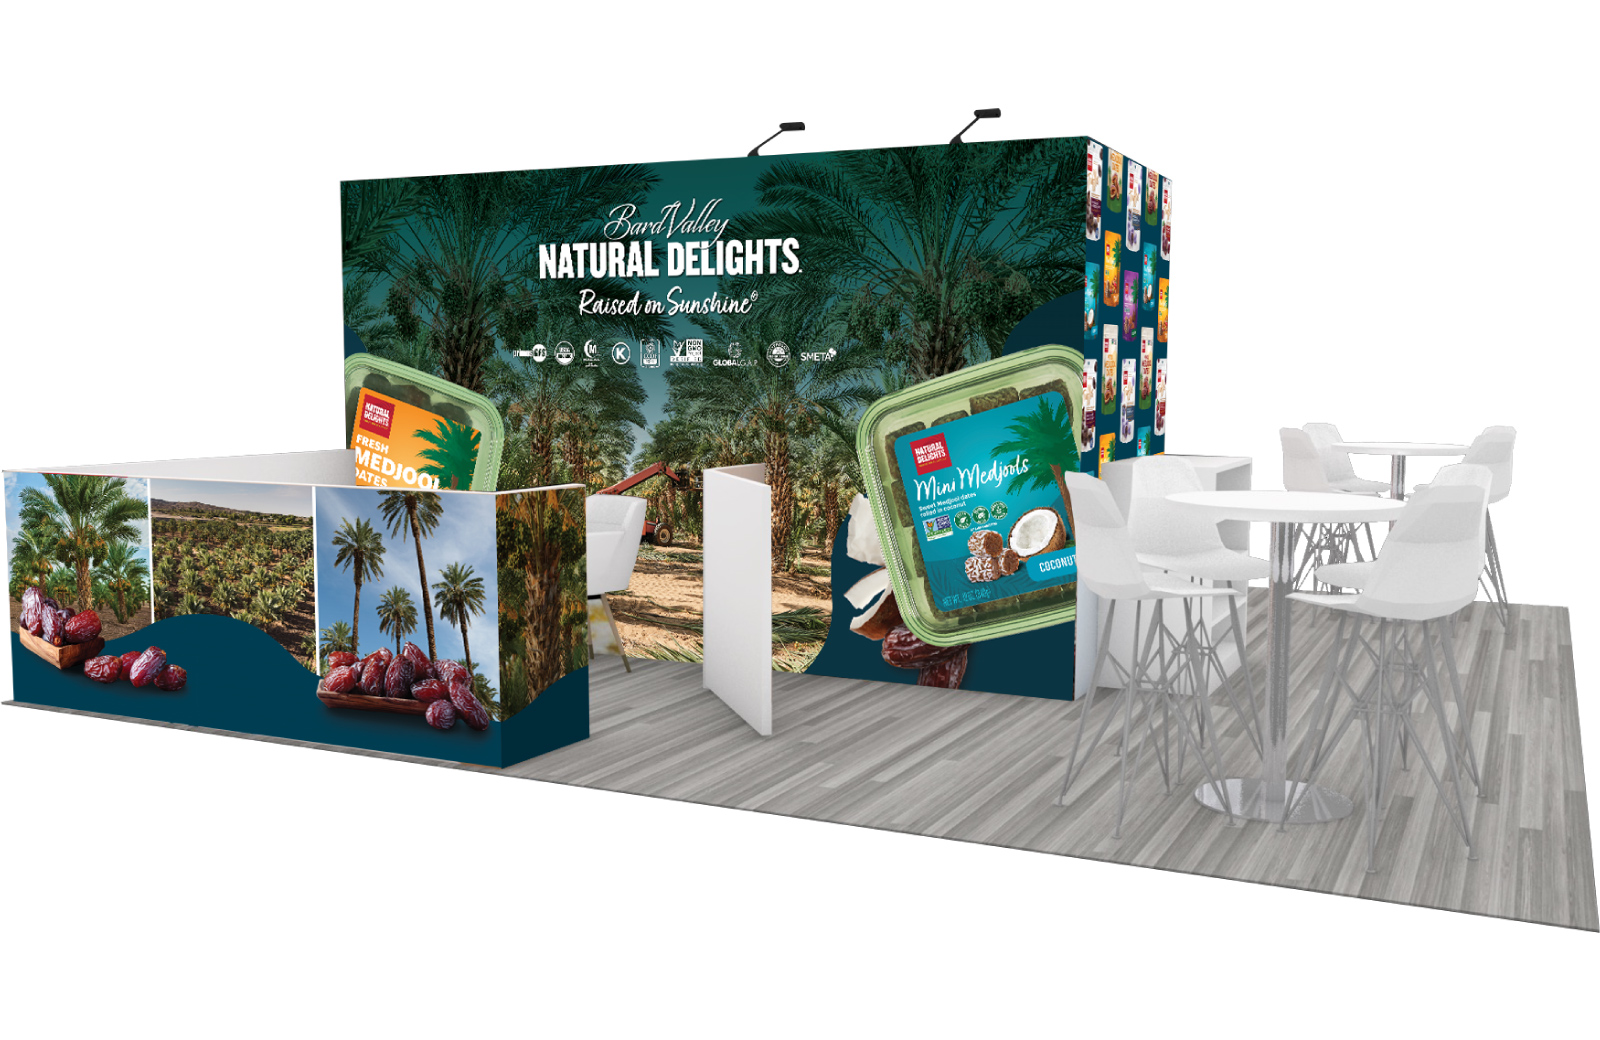 A mock-up of a tradeshow booth with images of Natural Delights products and date trees